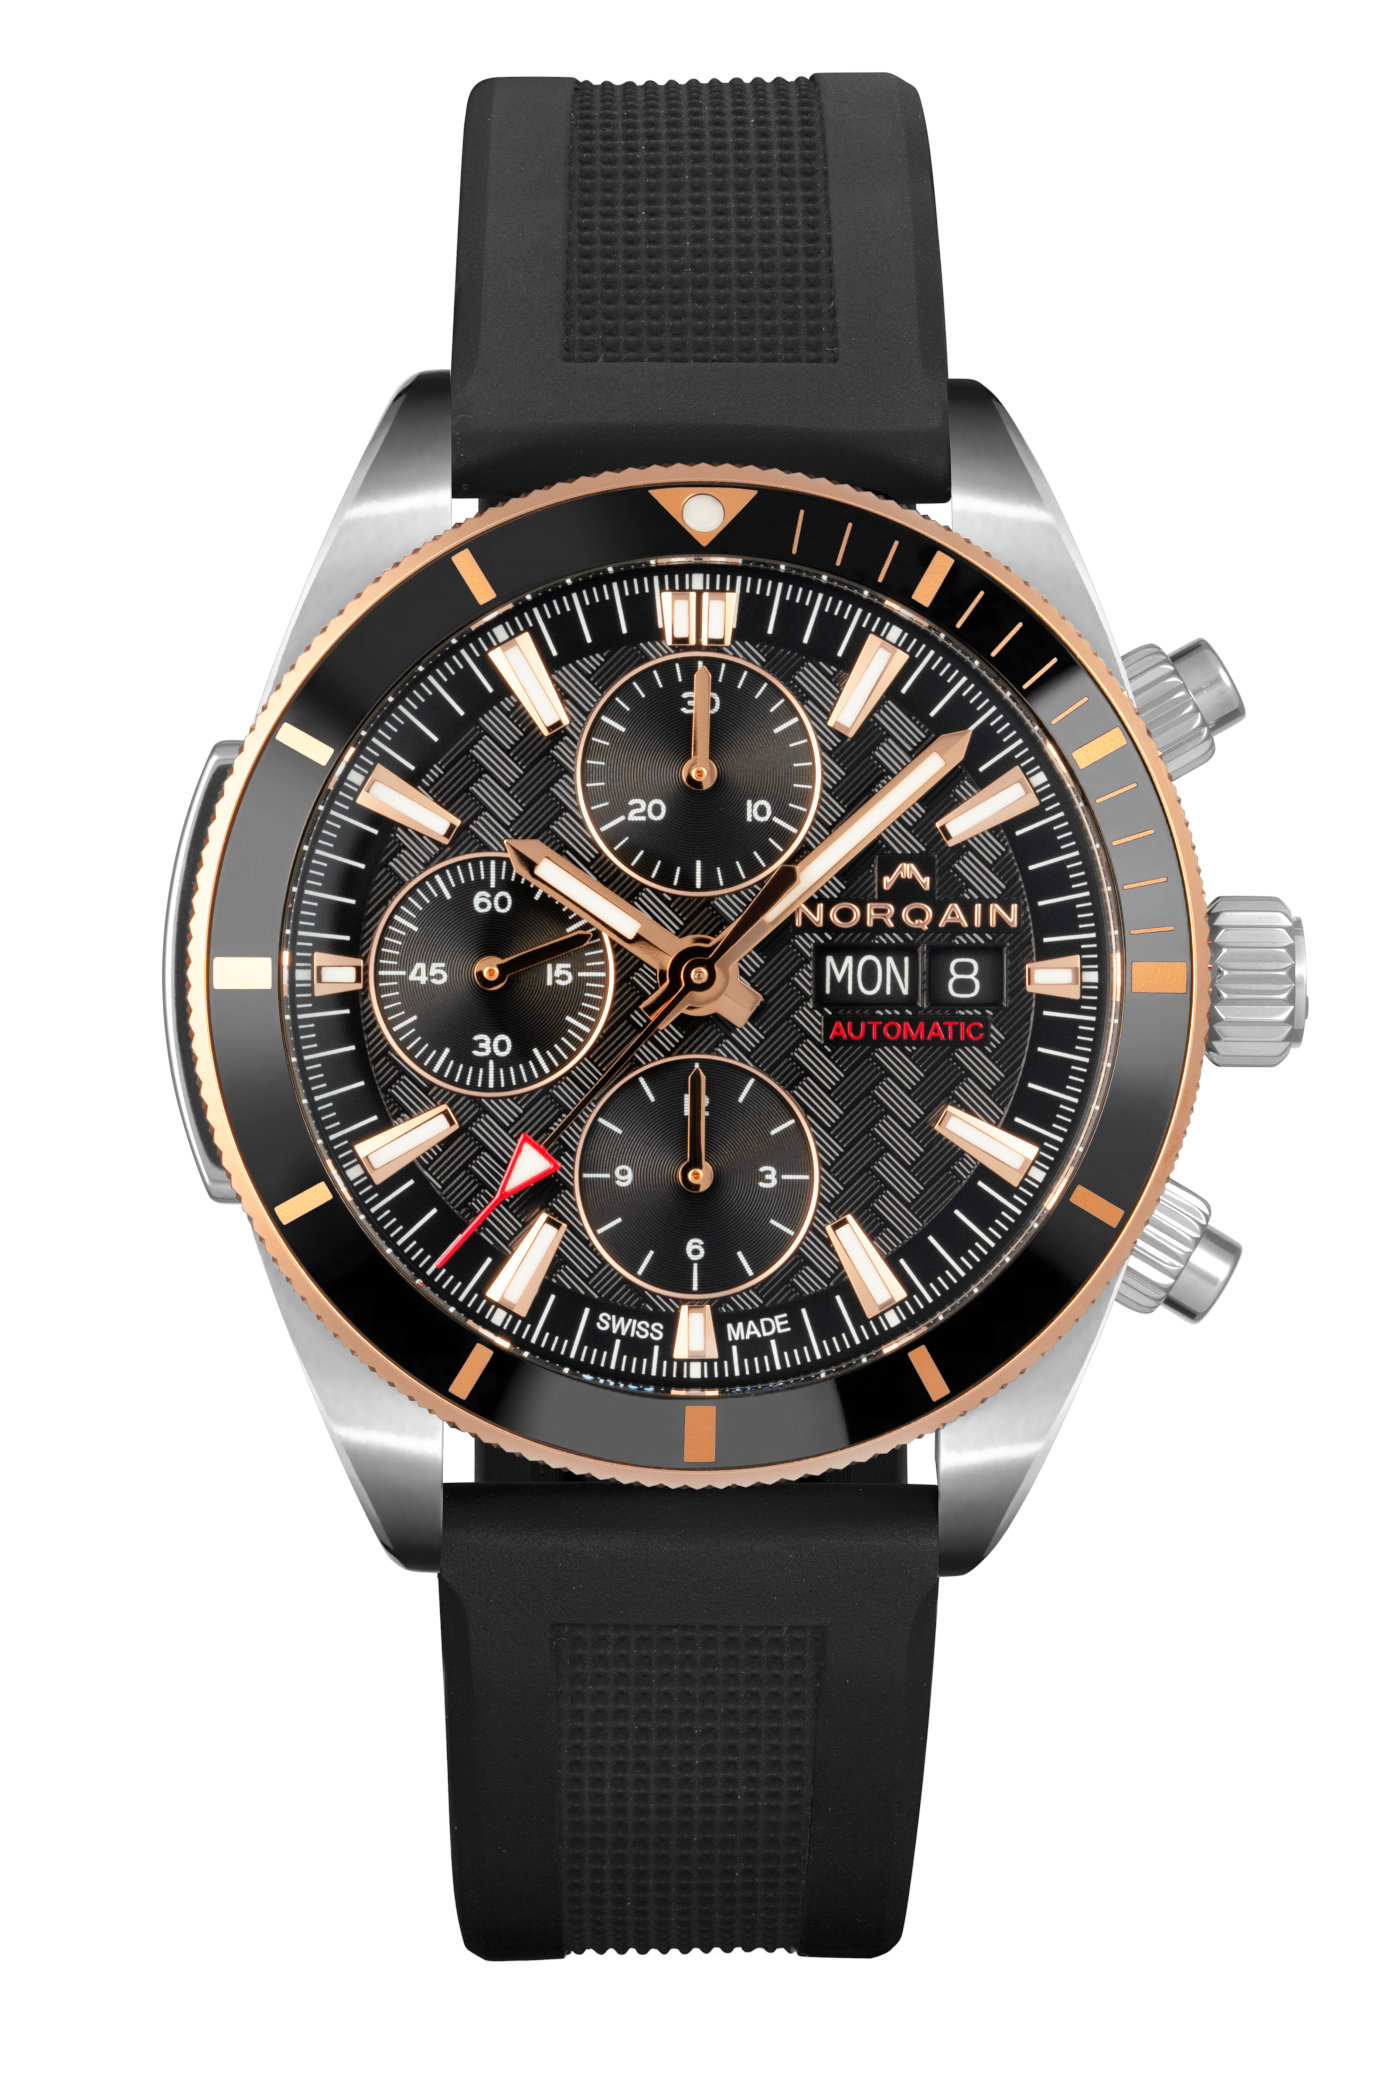 Norqain Adventure Sport Chrono Day-Date two-tone steel & gold - 5